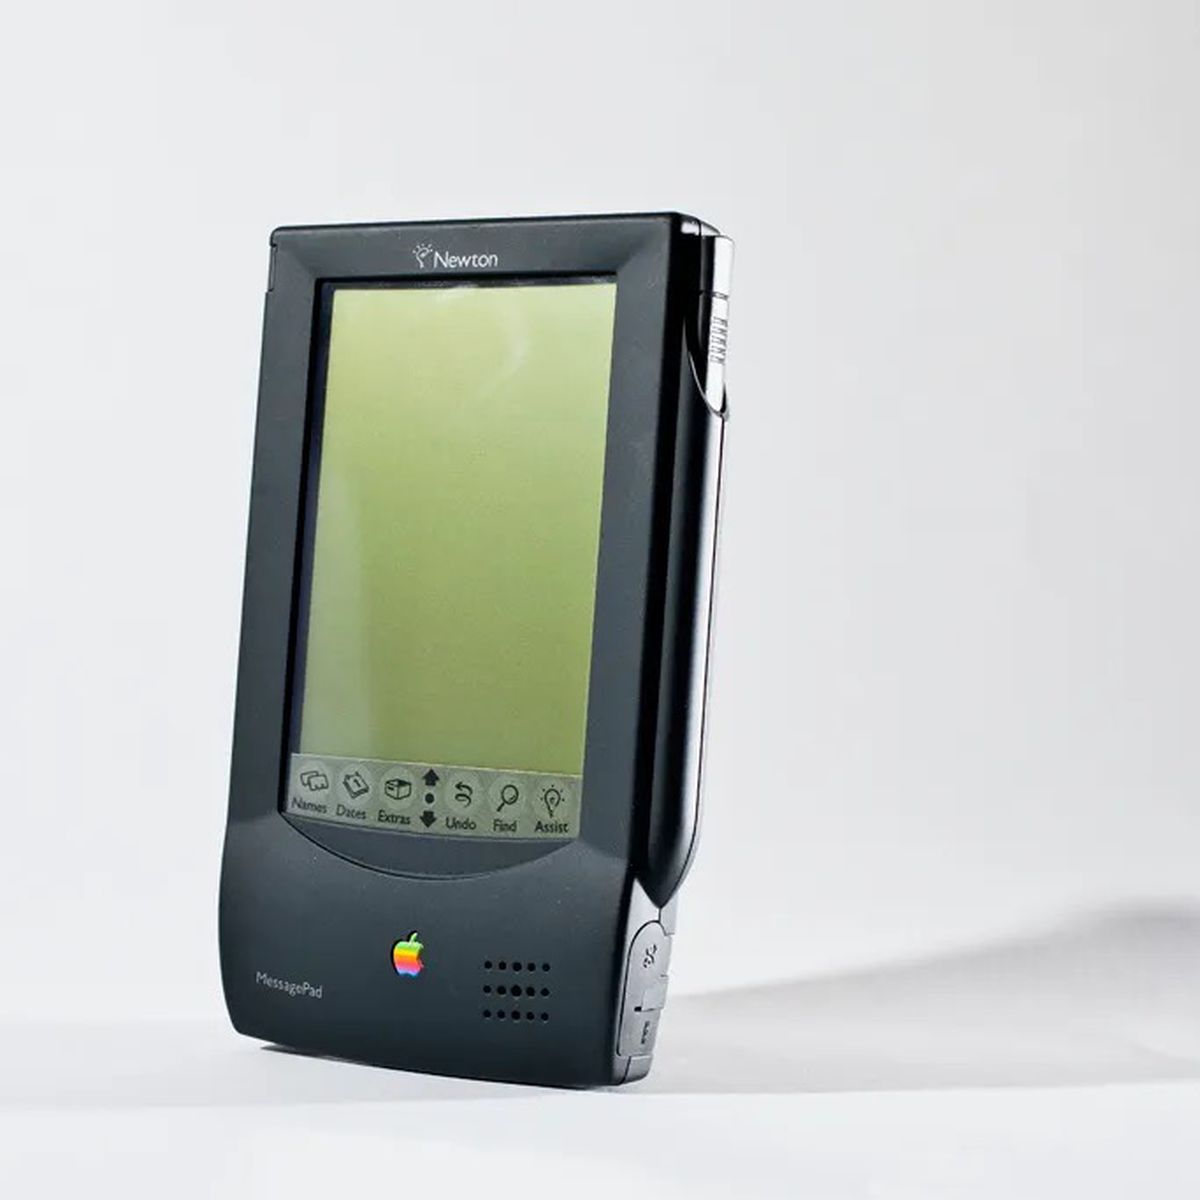 The Apple Vision Pro is The Next Newton: An Expensive Leap into Obsolescence